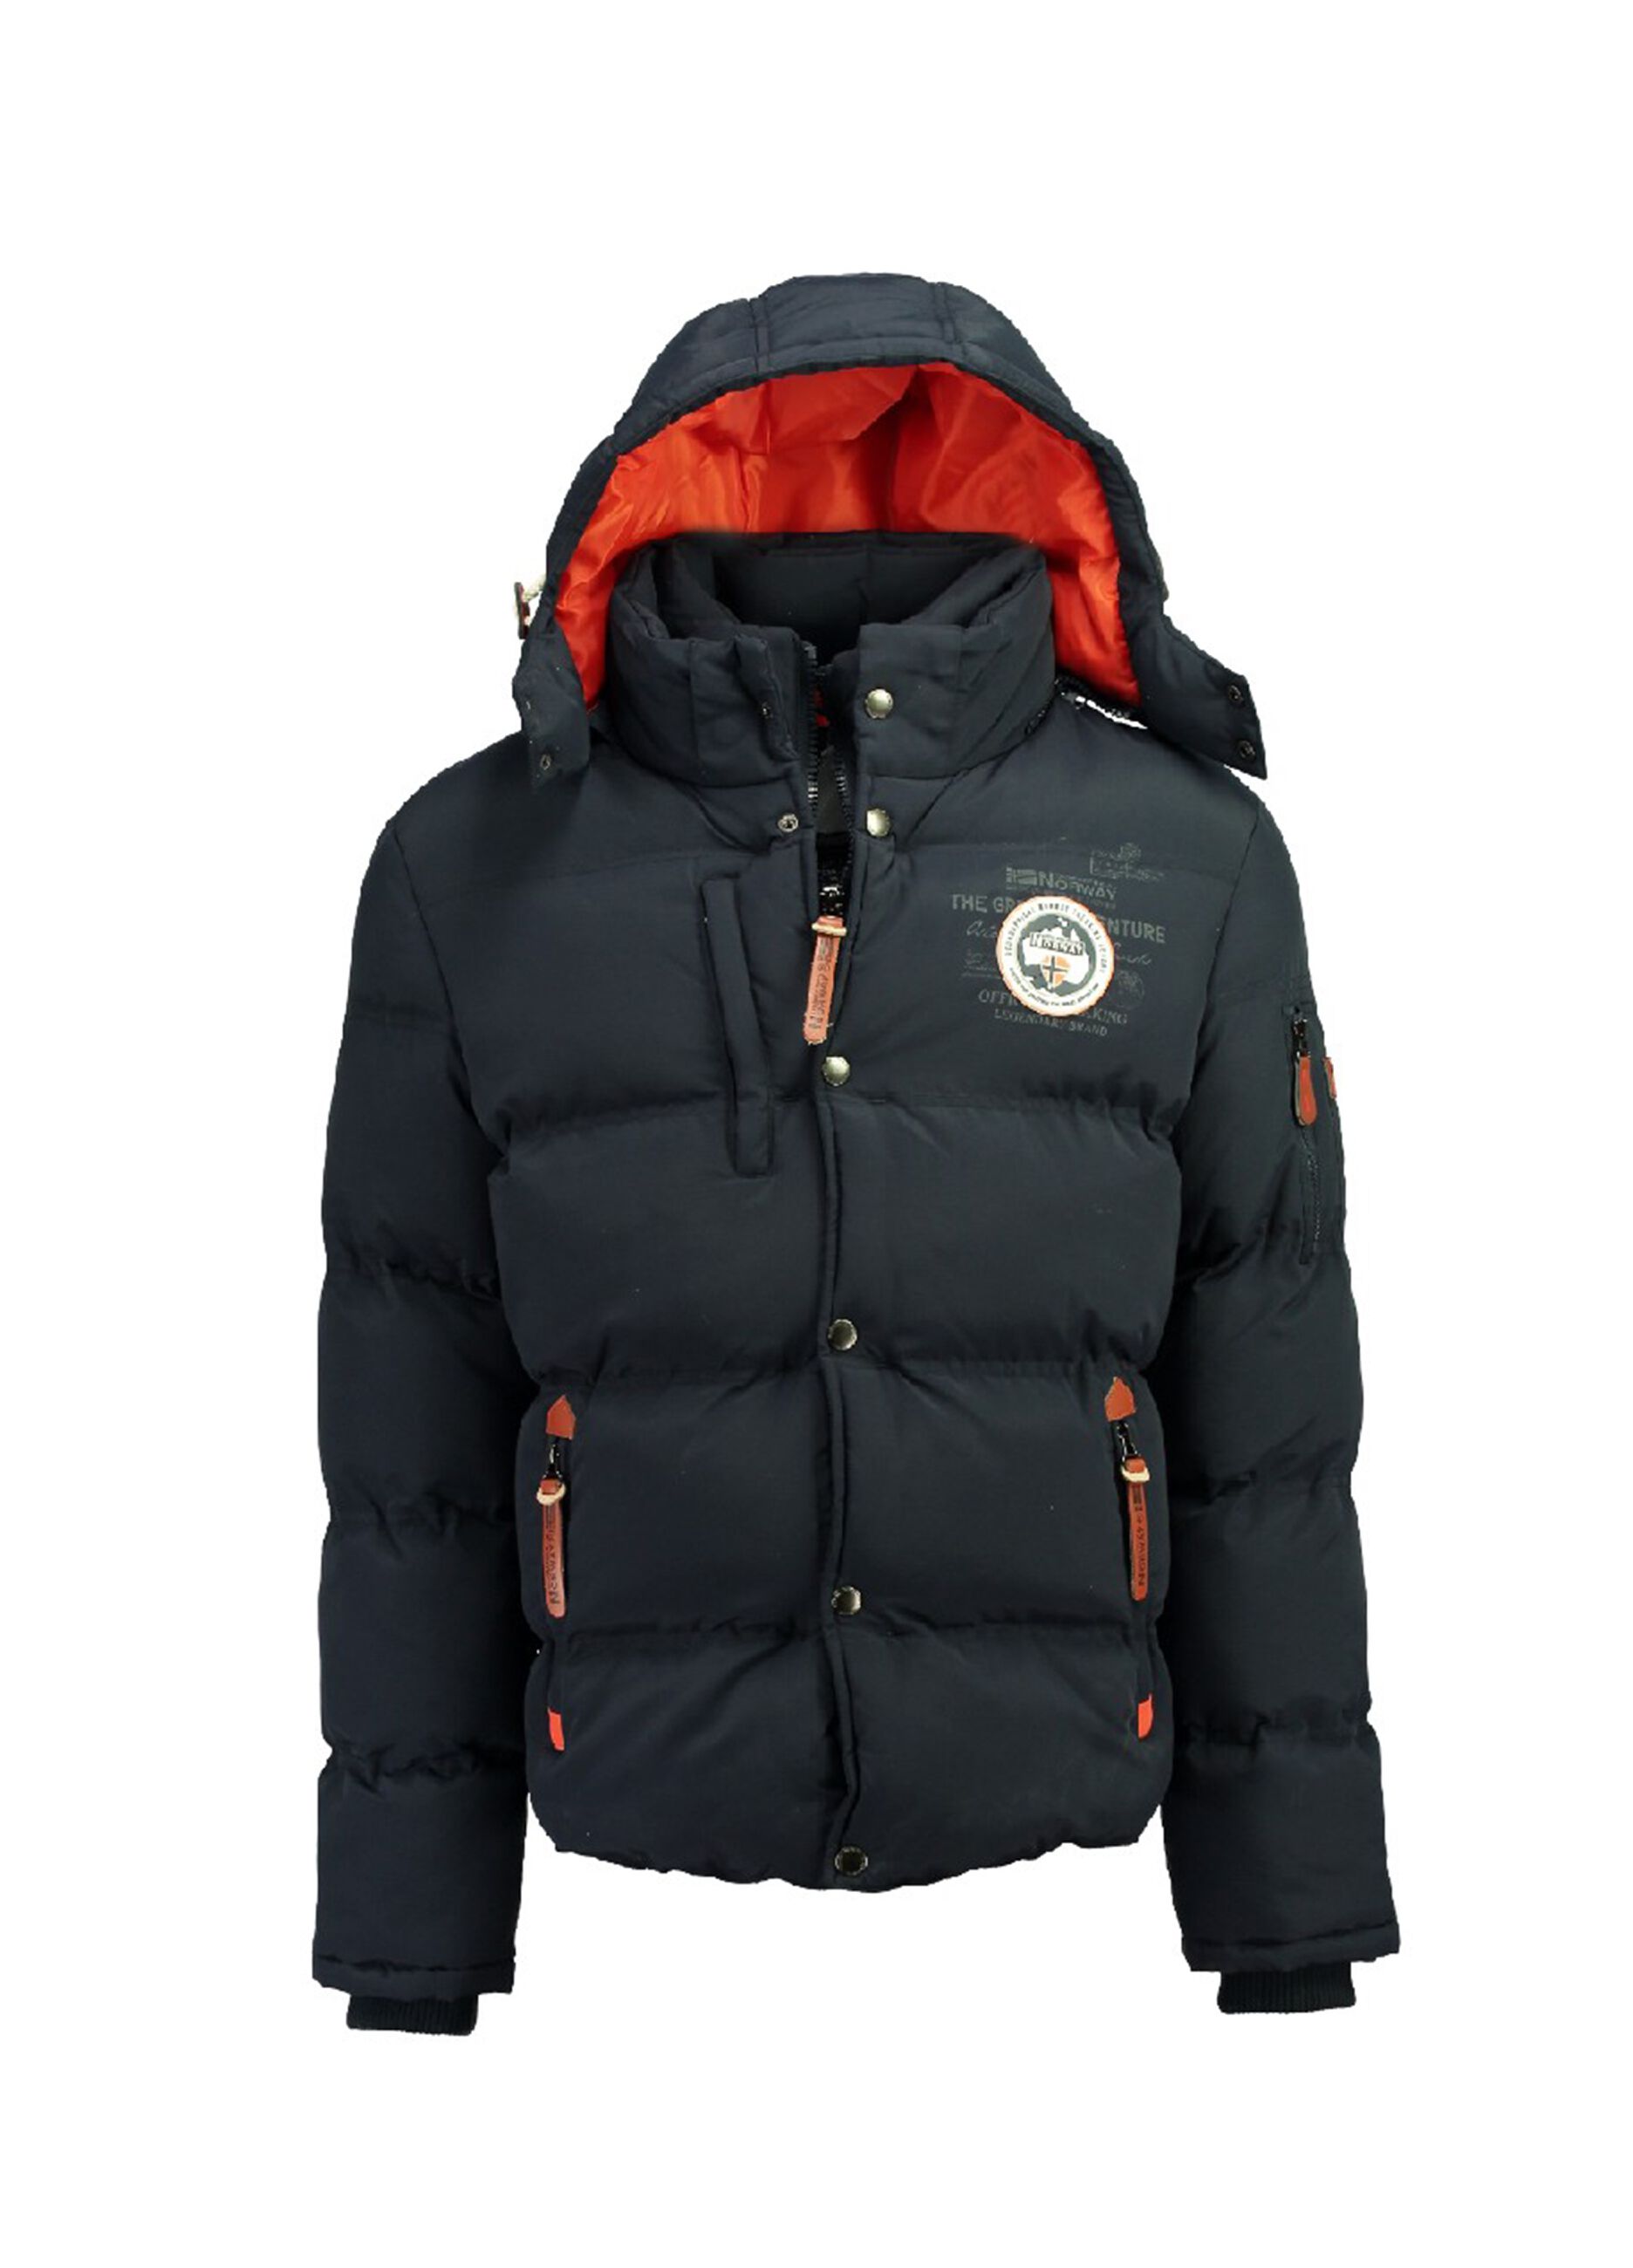 Geographical Norway Coats, Jackets & Vests for Women for sale